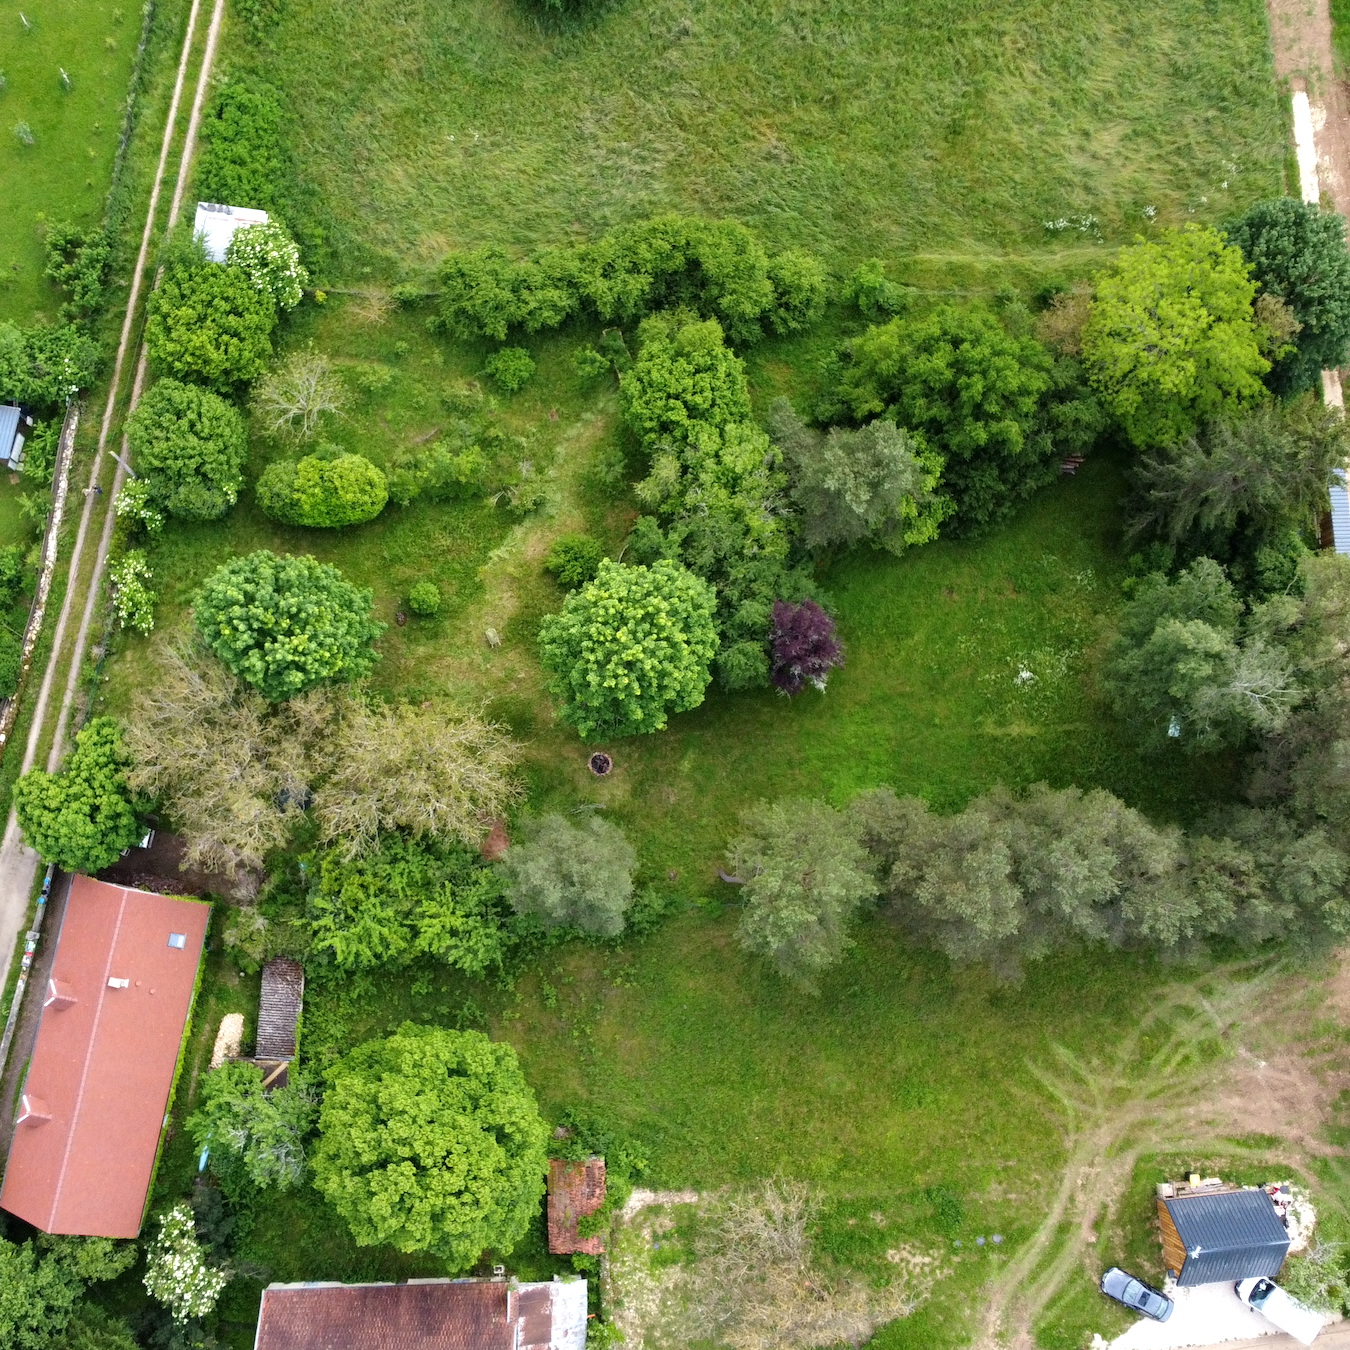 House and garden from the sky